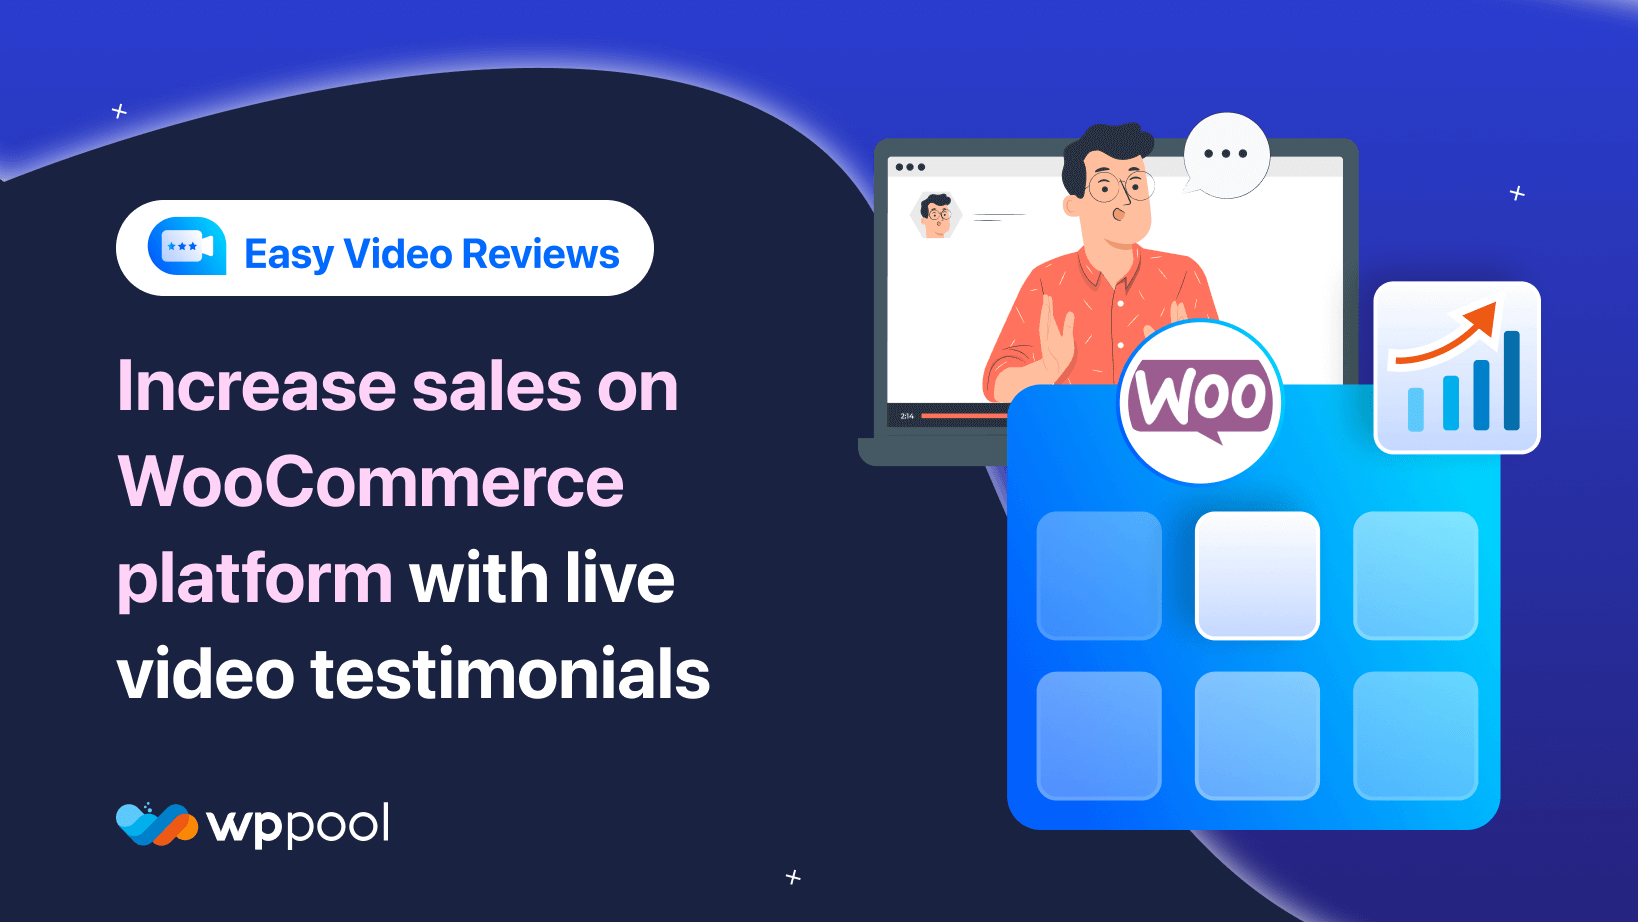 Collect video testimonials and increase sales on your WooCommerce platform with live video testimonials